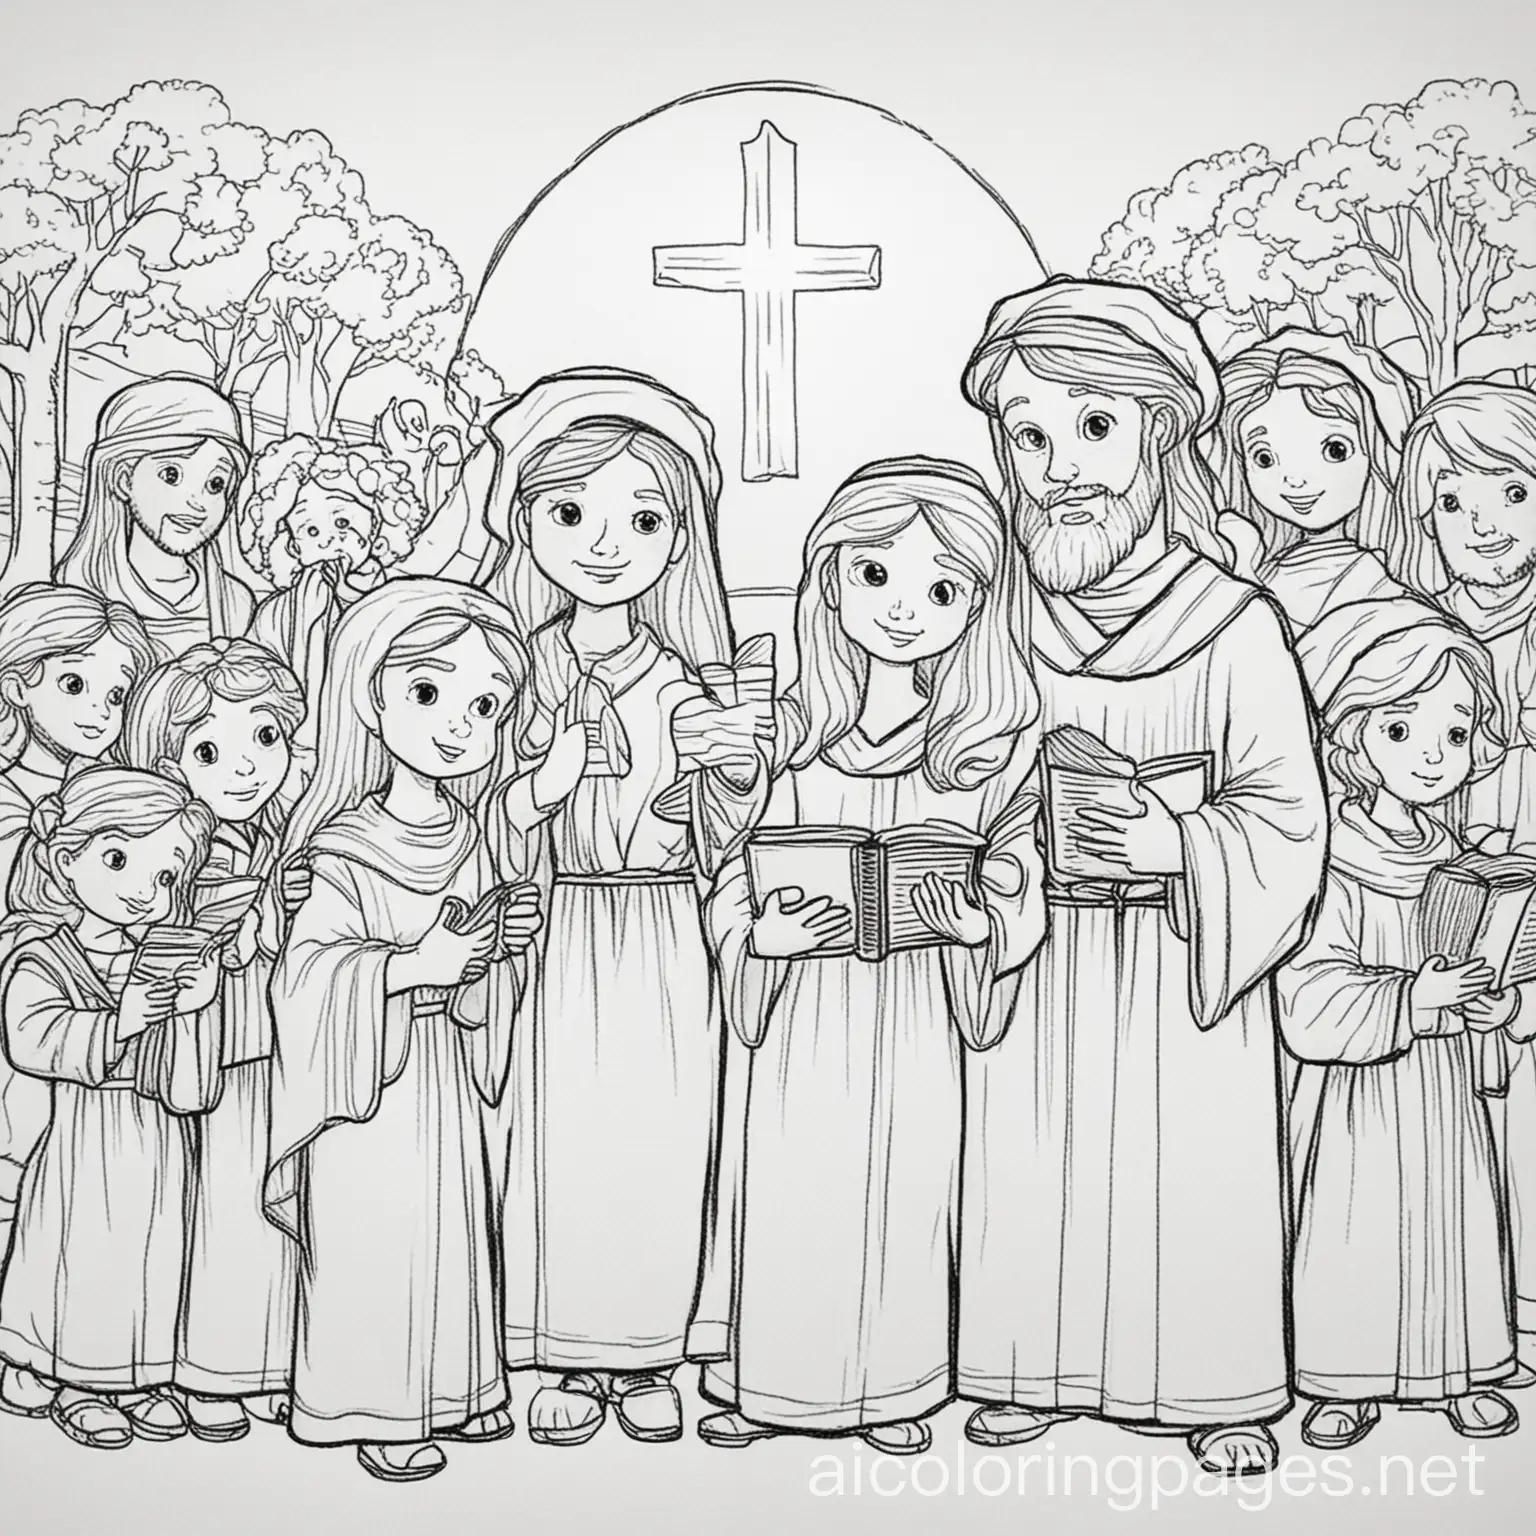 Bible stories
, Coloring Page, black and white, line art, white background, Simplicity, Ample White Space. The background of the coloring page is plain white to make it easy for young children to color within the lines. The outlines of all the subjects are easy to distinguish, making it simple for kids to color without too much difficulty